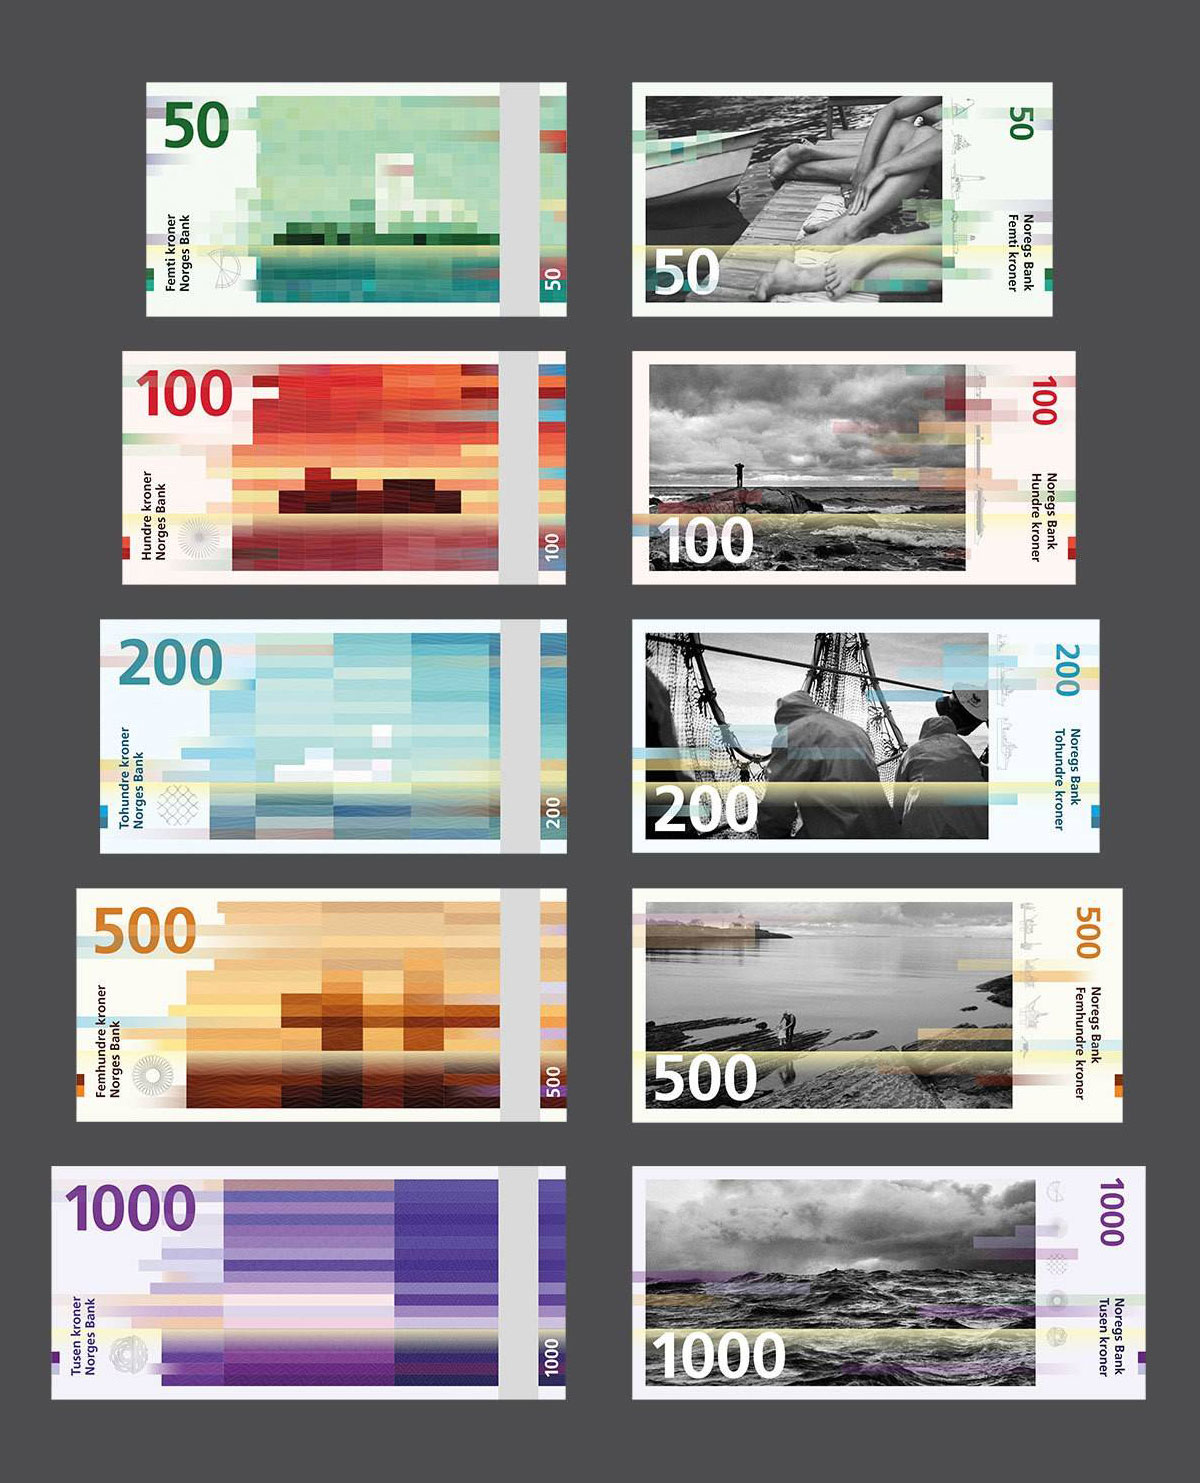 Norway's new banknotes by the two Oslo-based design studios Snøhetta & The Metric System. A beautiful blend between pixelated designs and analog images.